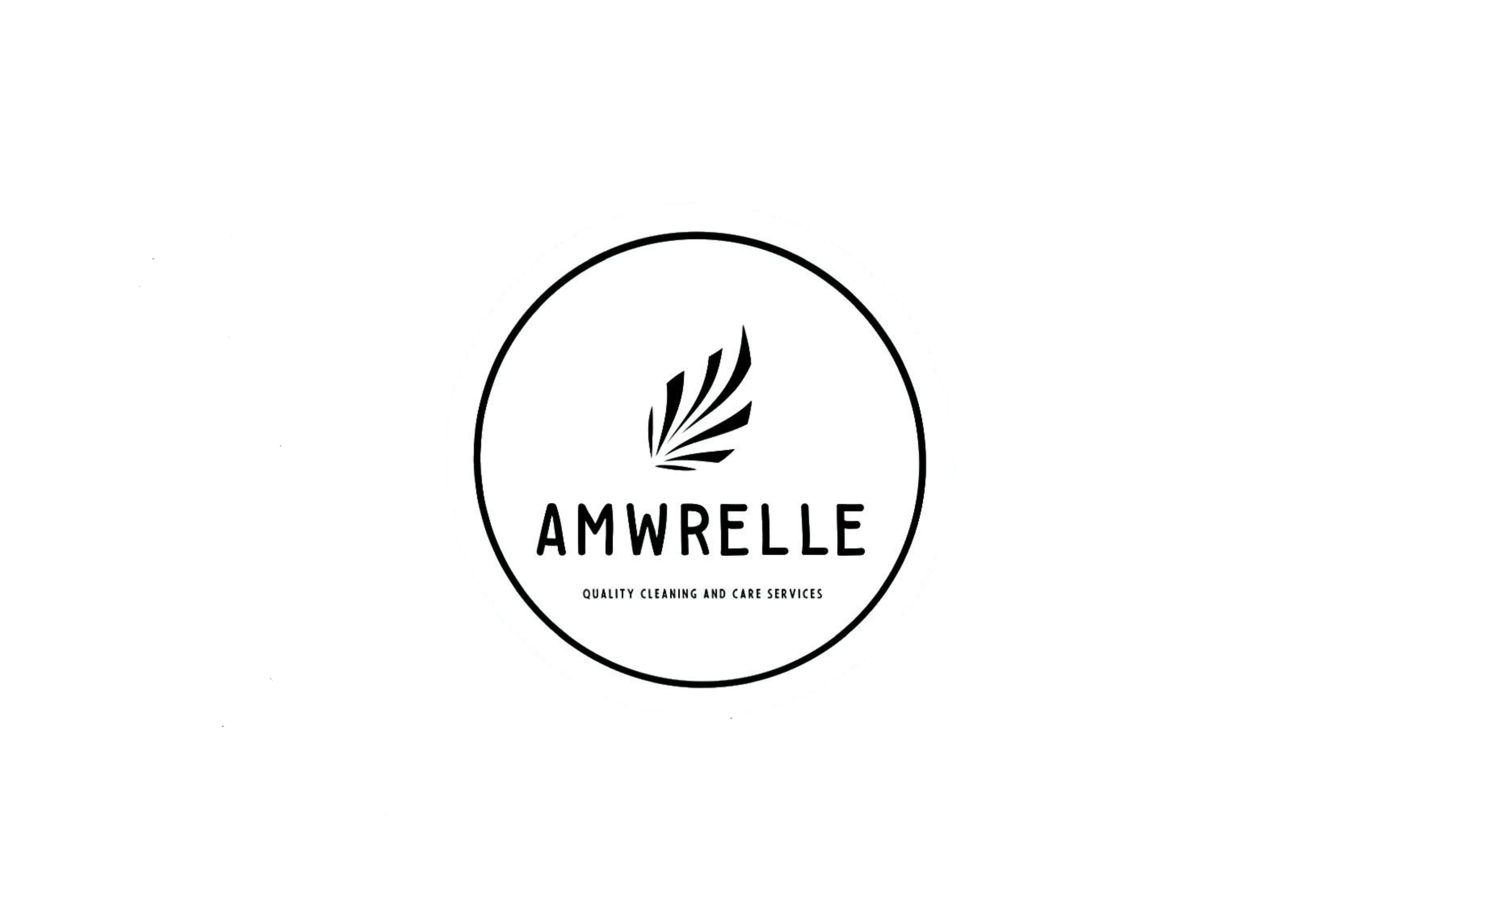 Amwrelle Quality Cleaning Services